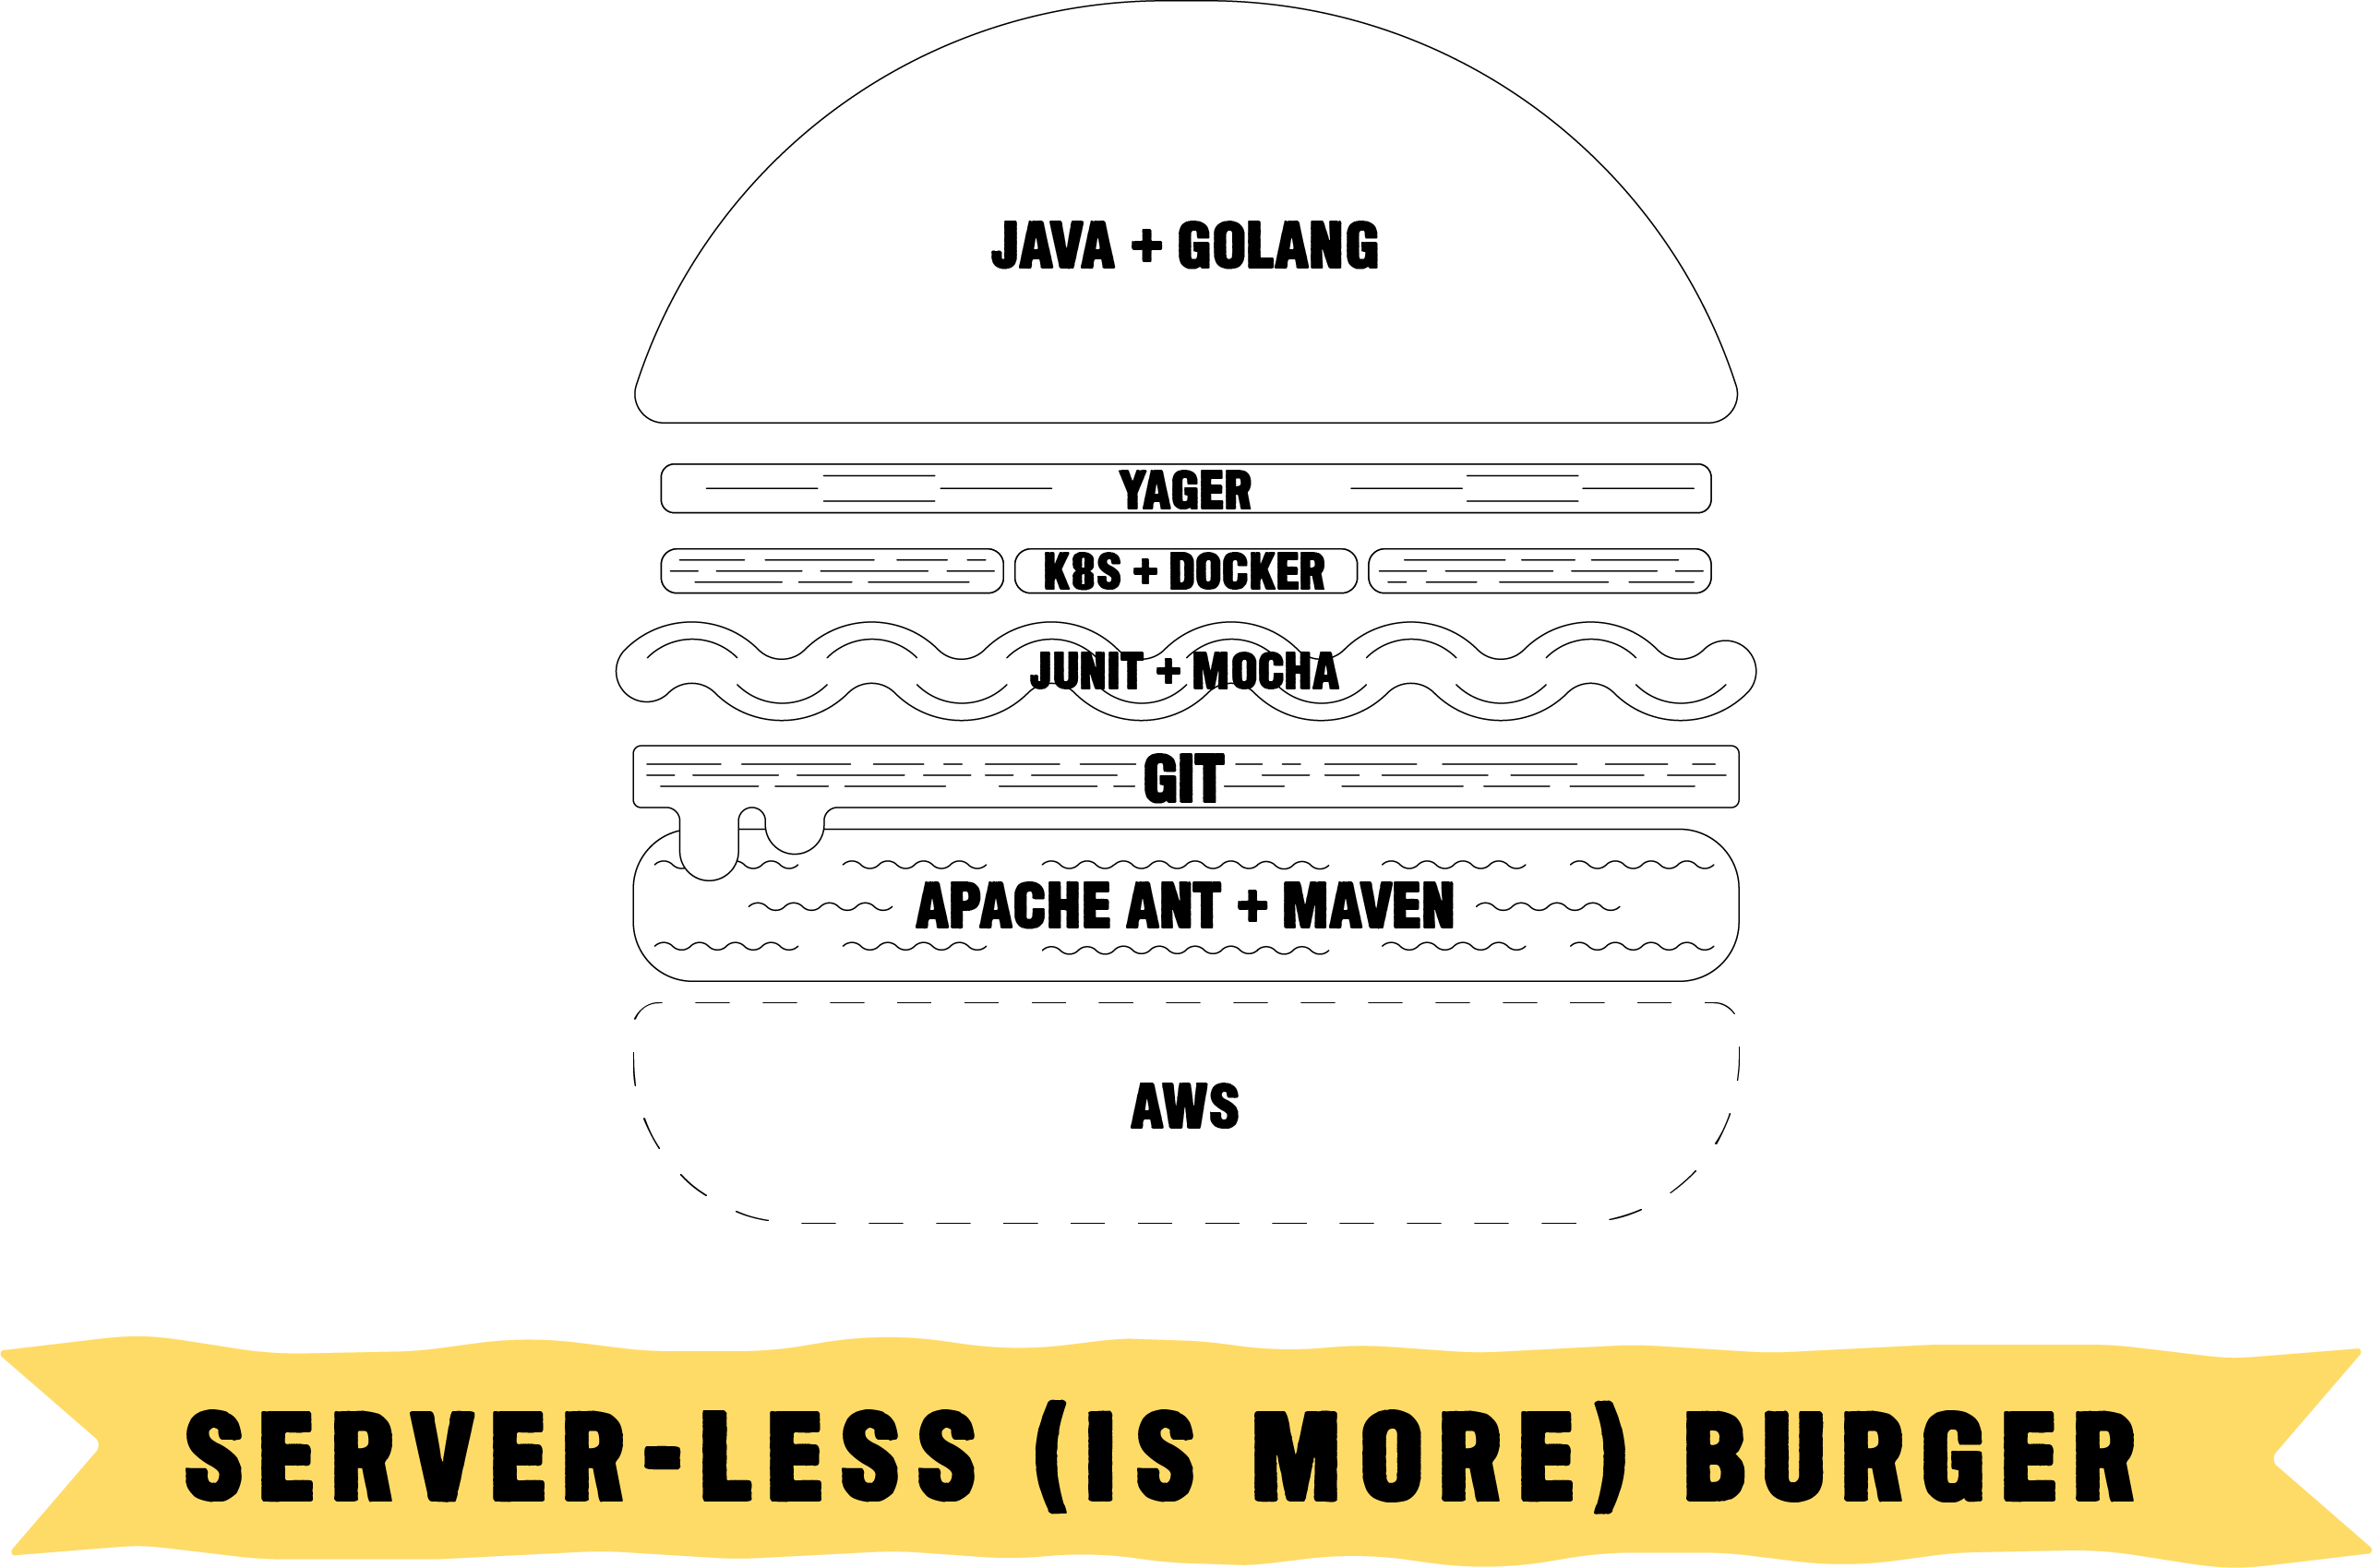 Serverless technology stack in the shape of a burger